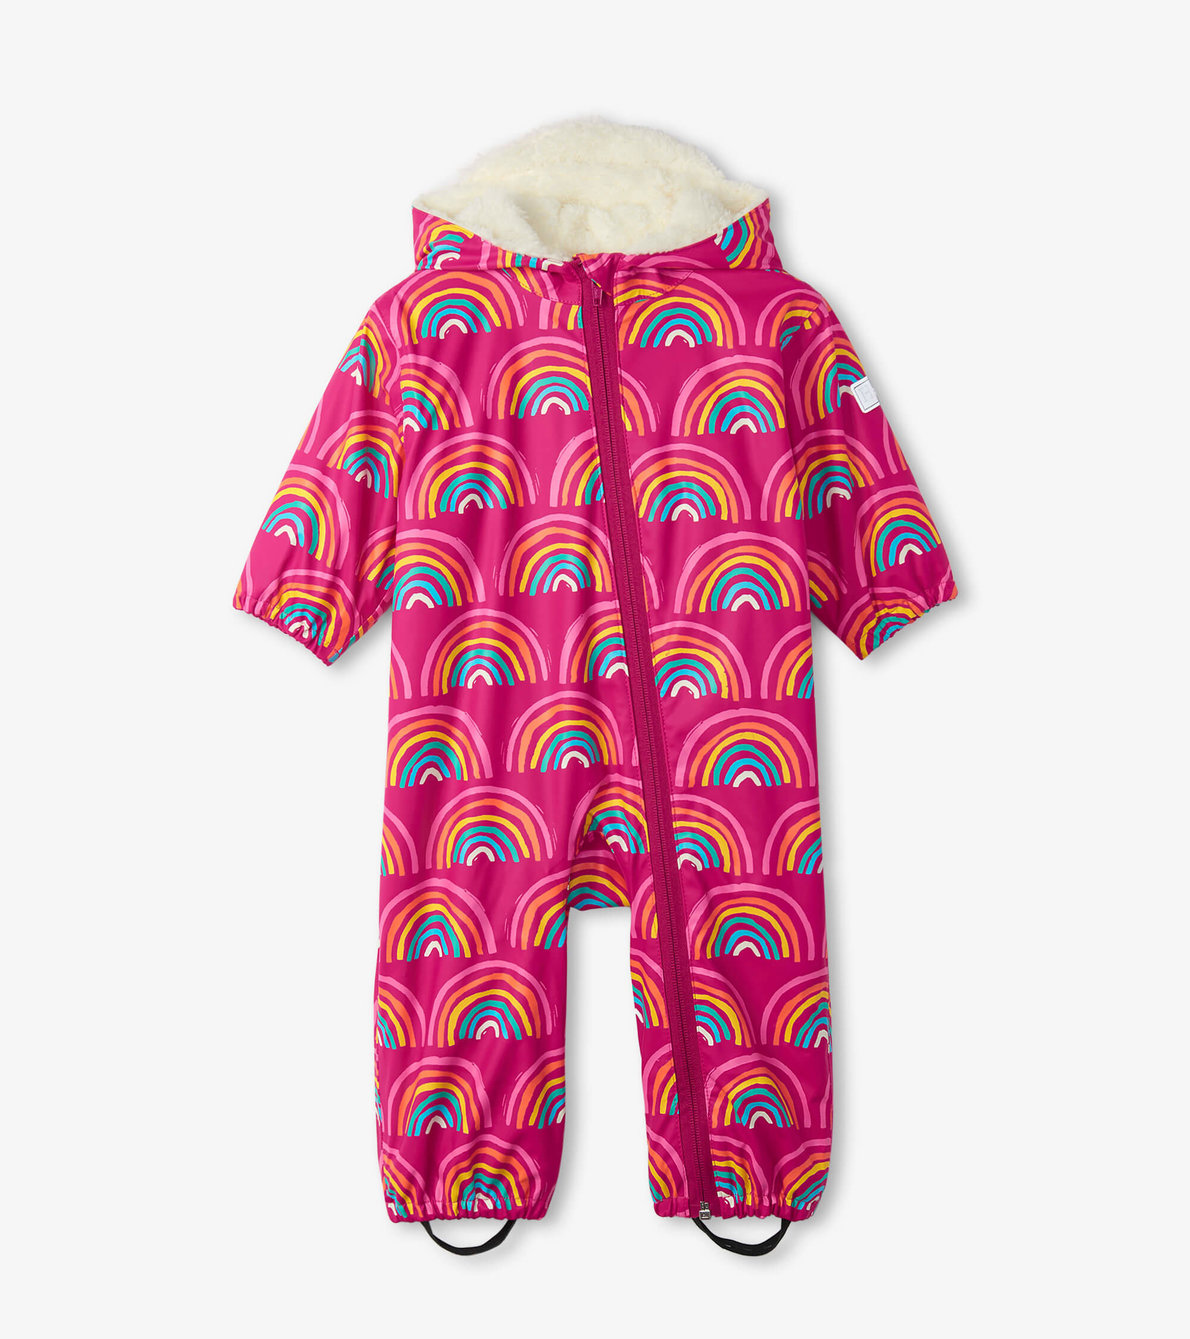 View larger image of Rainy Rainbows Sherpa Lined Baby Rain Suit